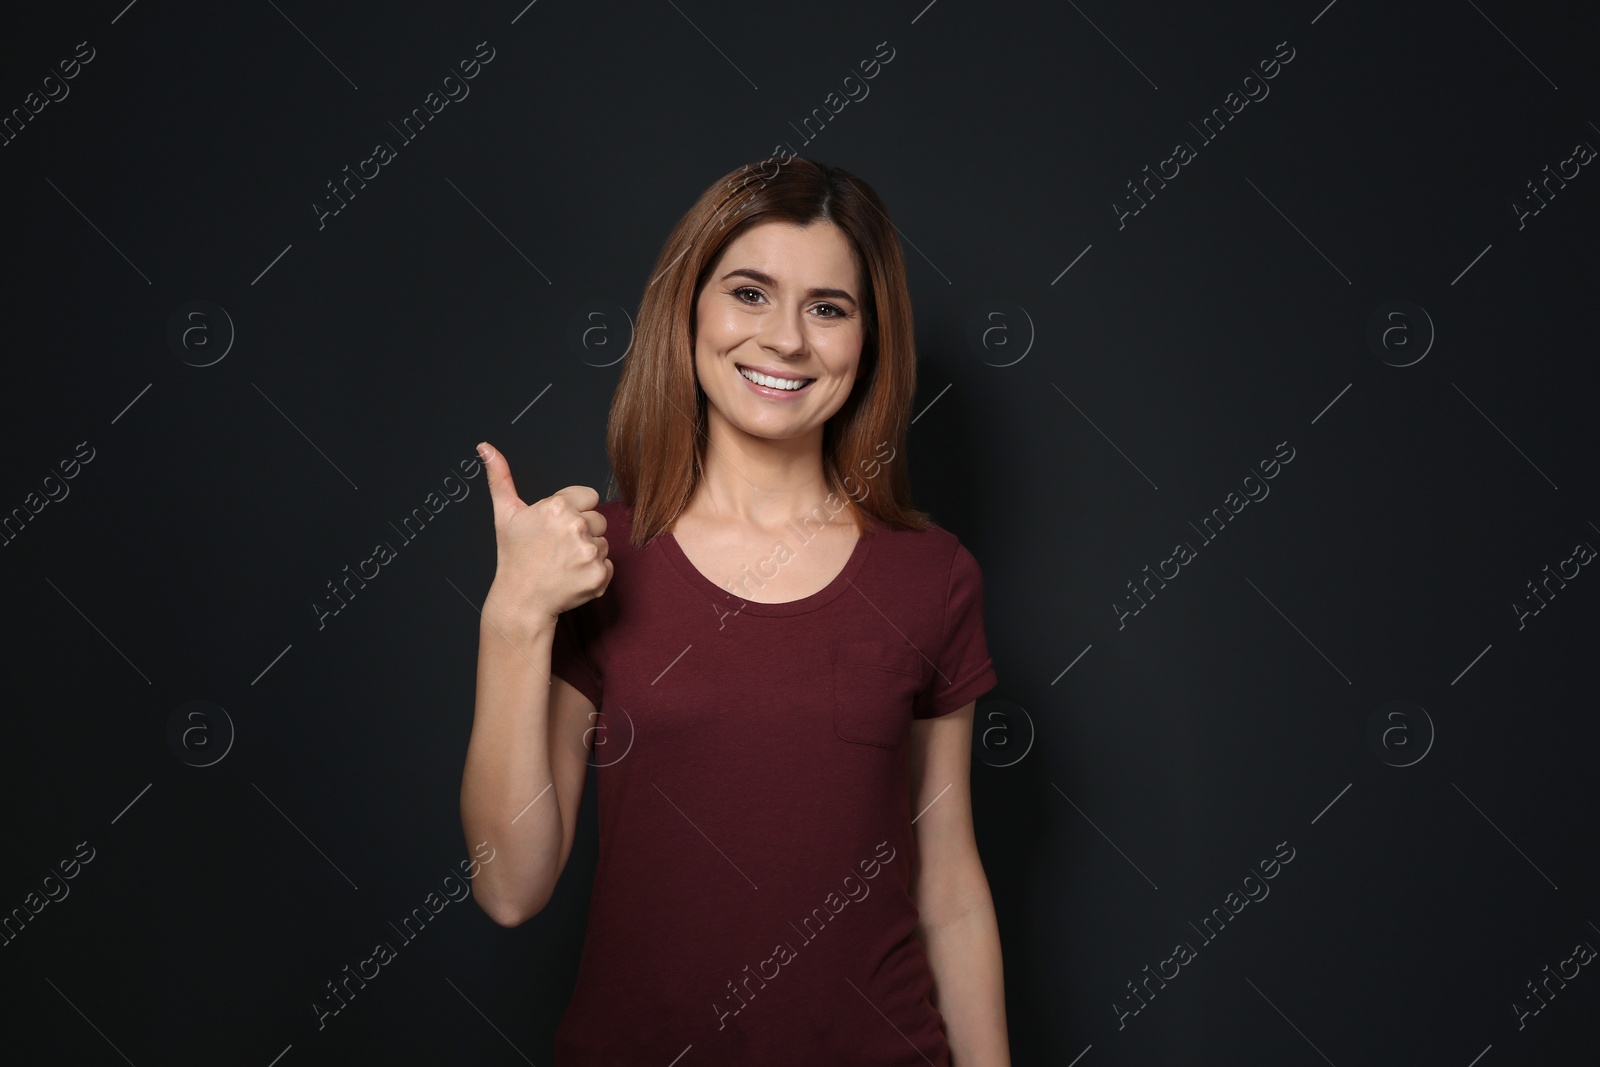 Photo of Woman showing THUMB UP gesture in sign language on black background